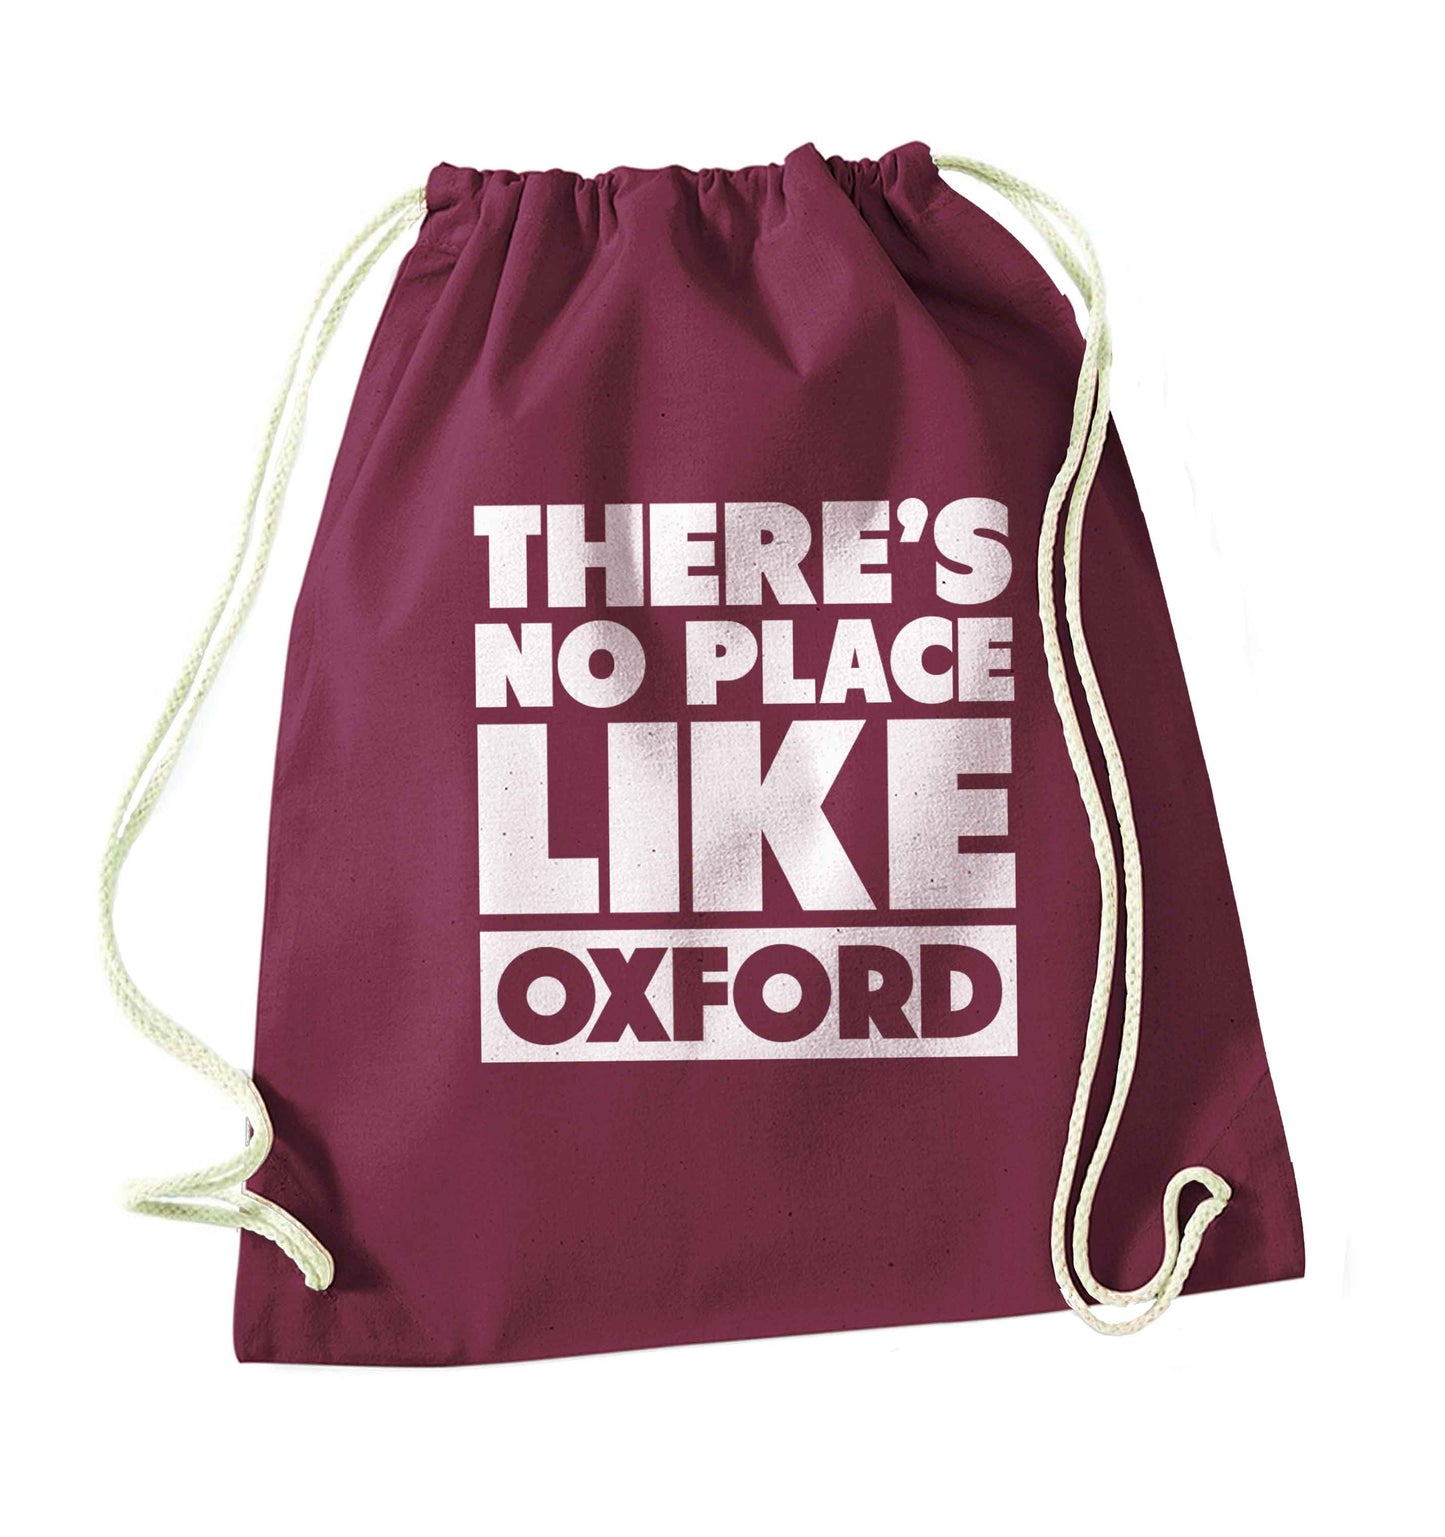 There's no place like Oxford maroon drawstring bag